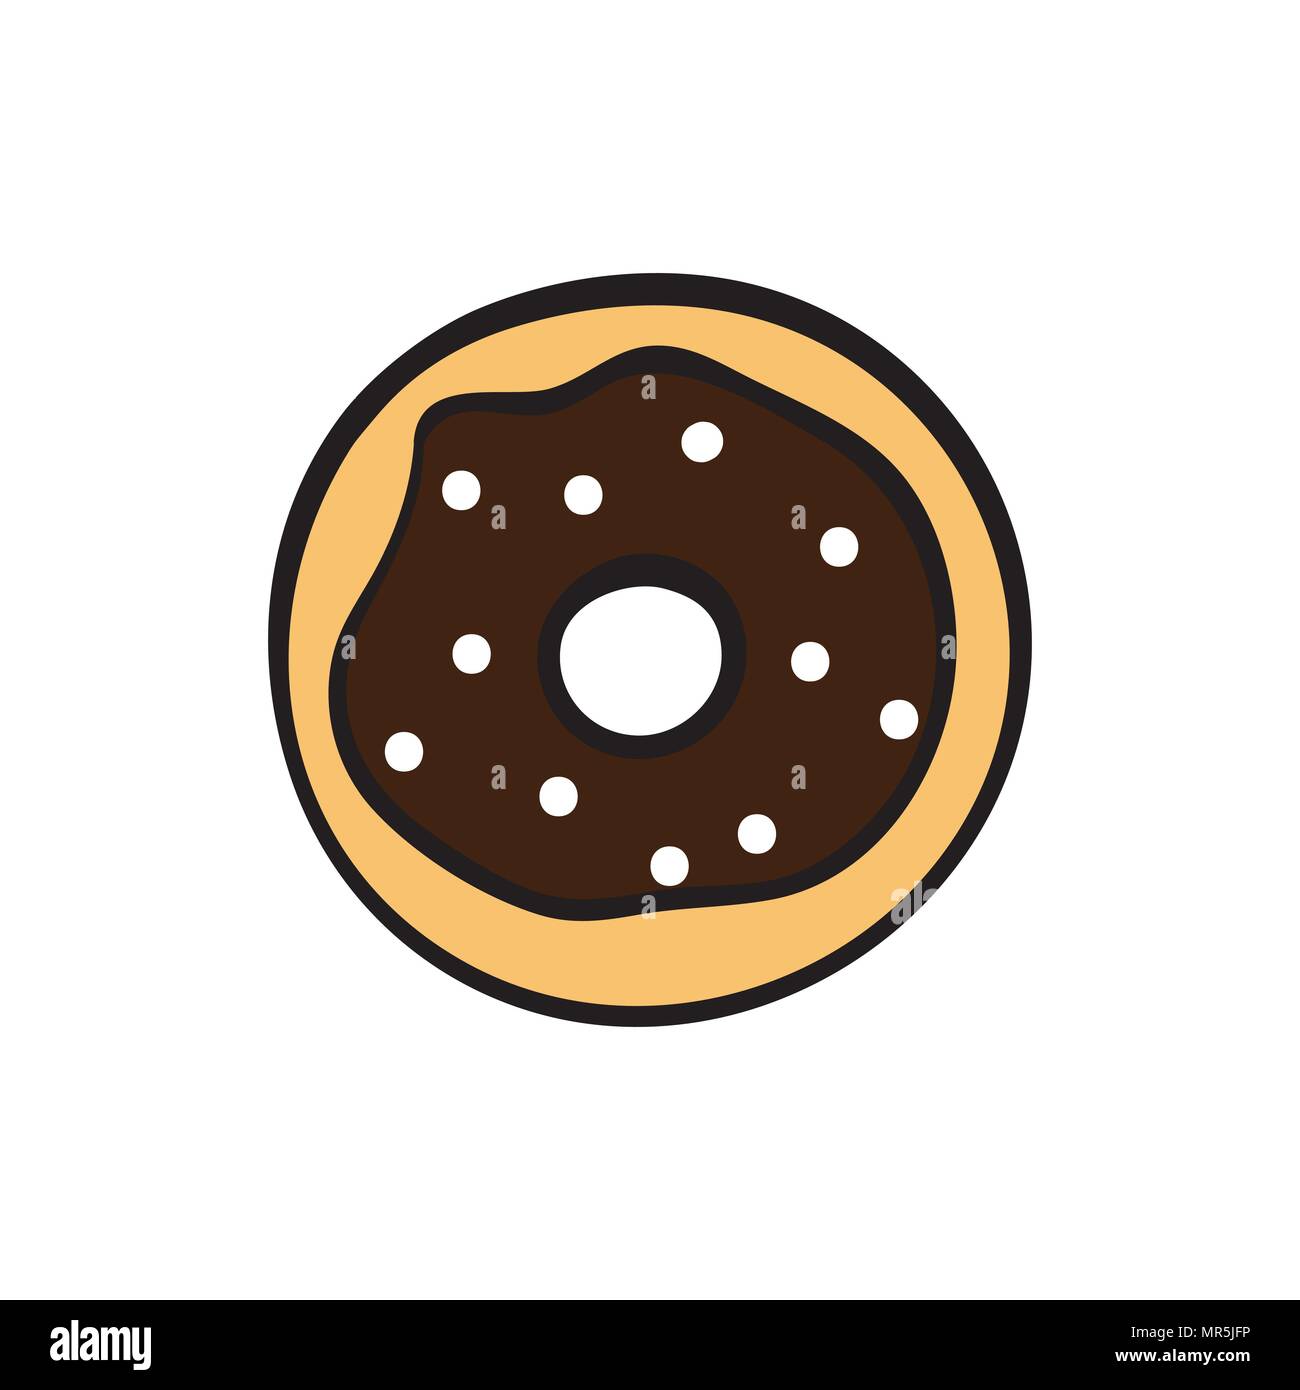 Cute chocolate donut on white background. Stock Vector